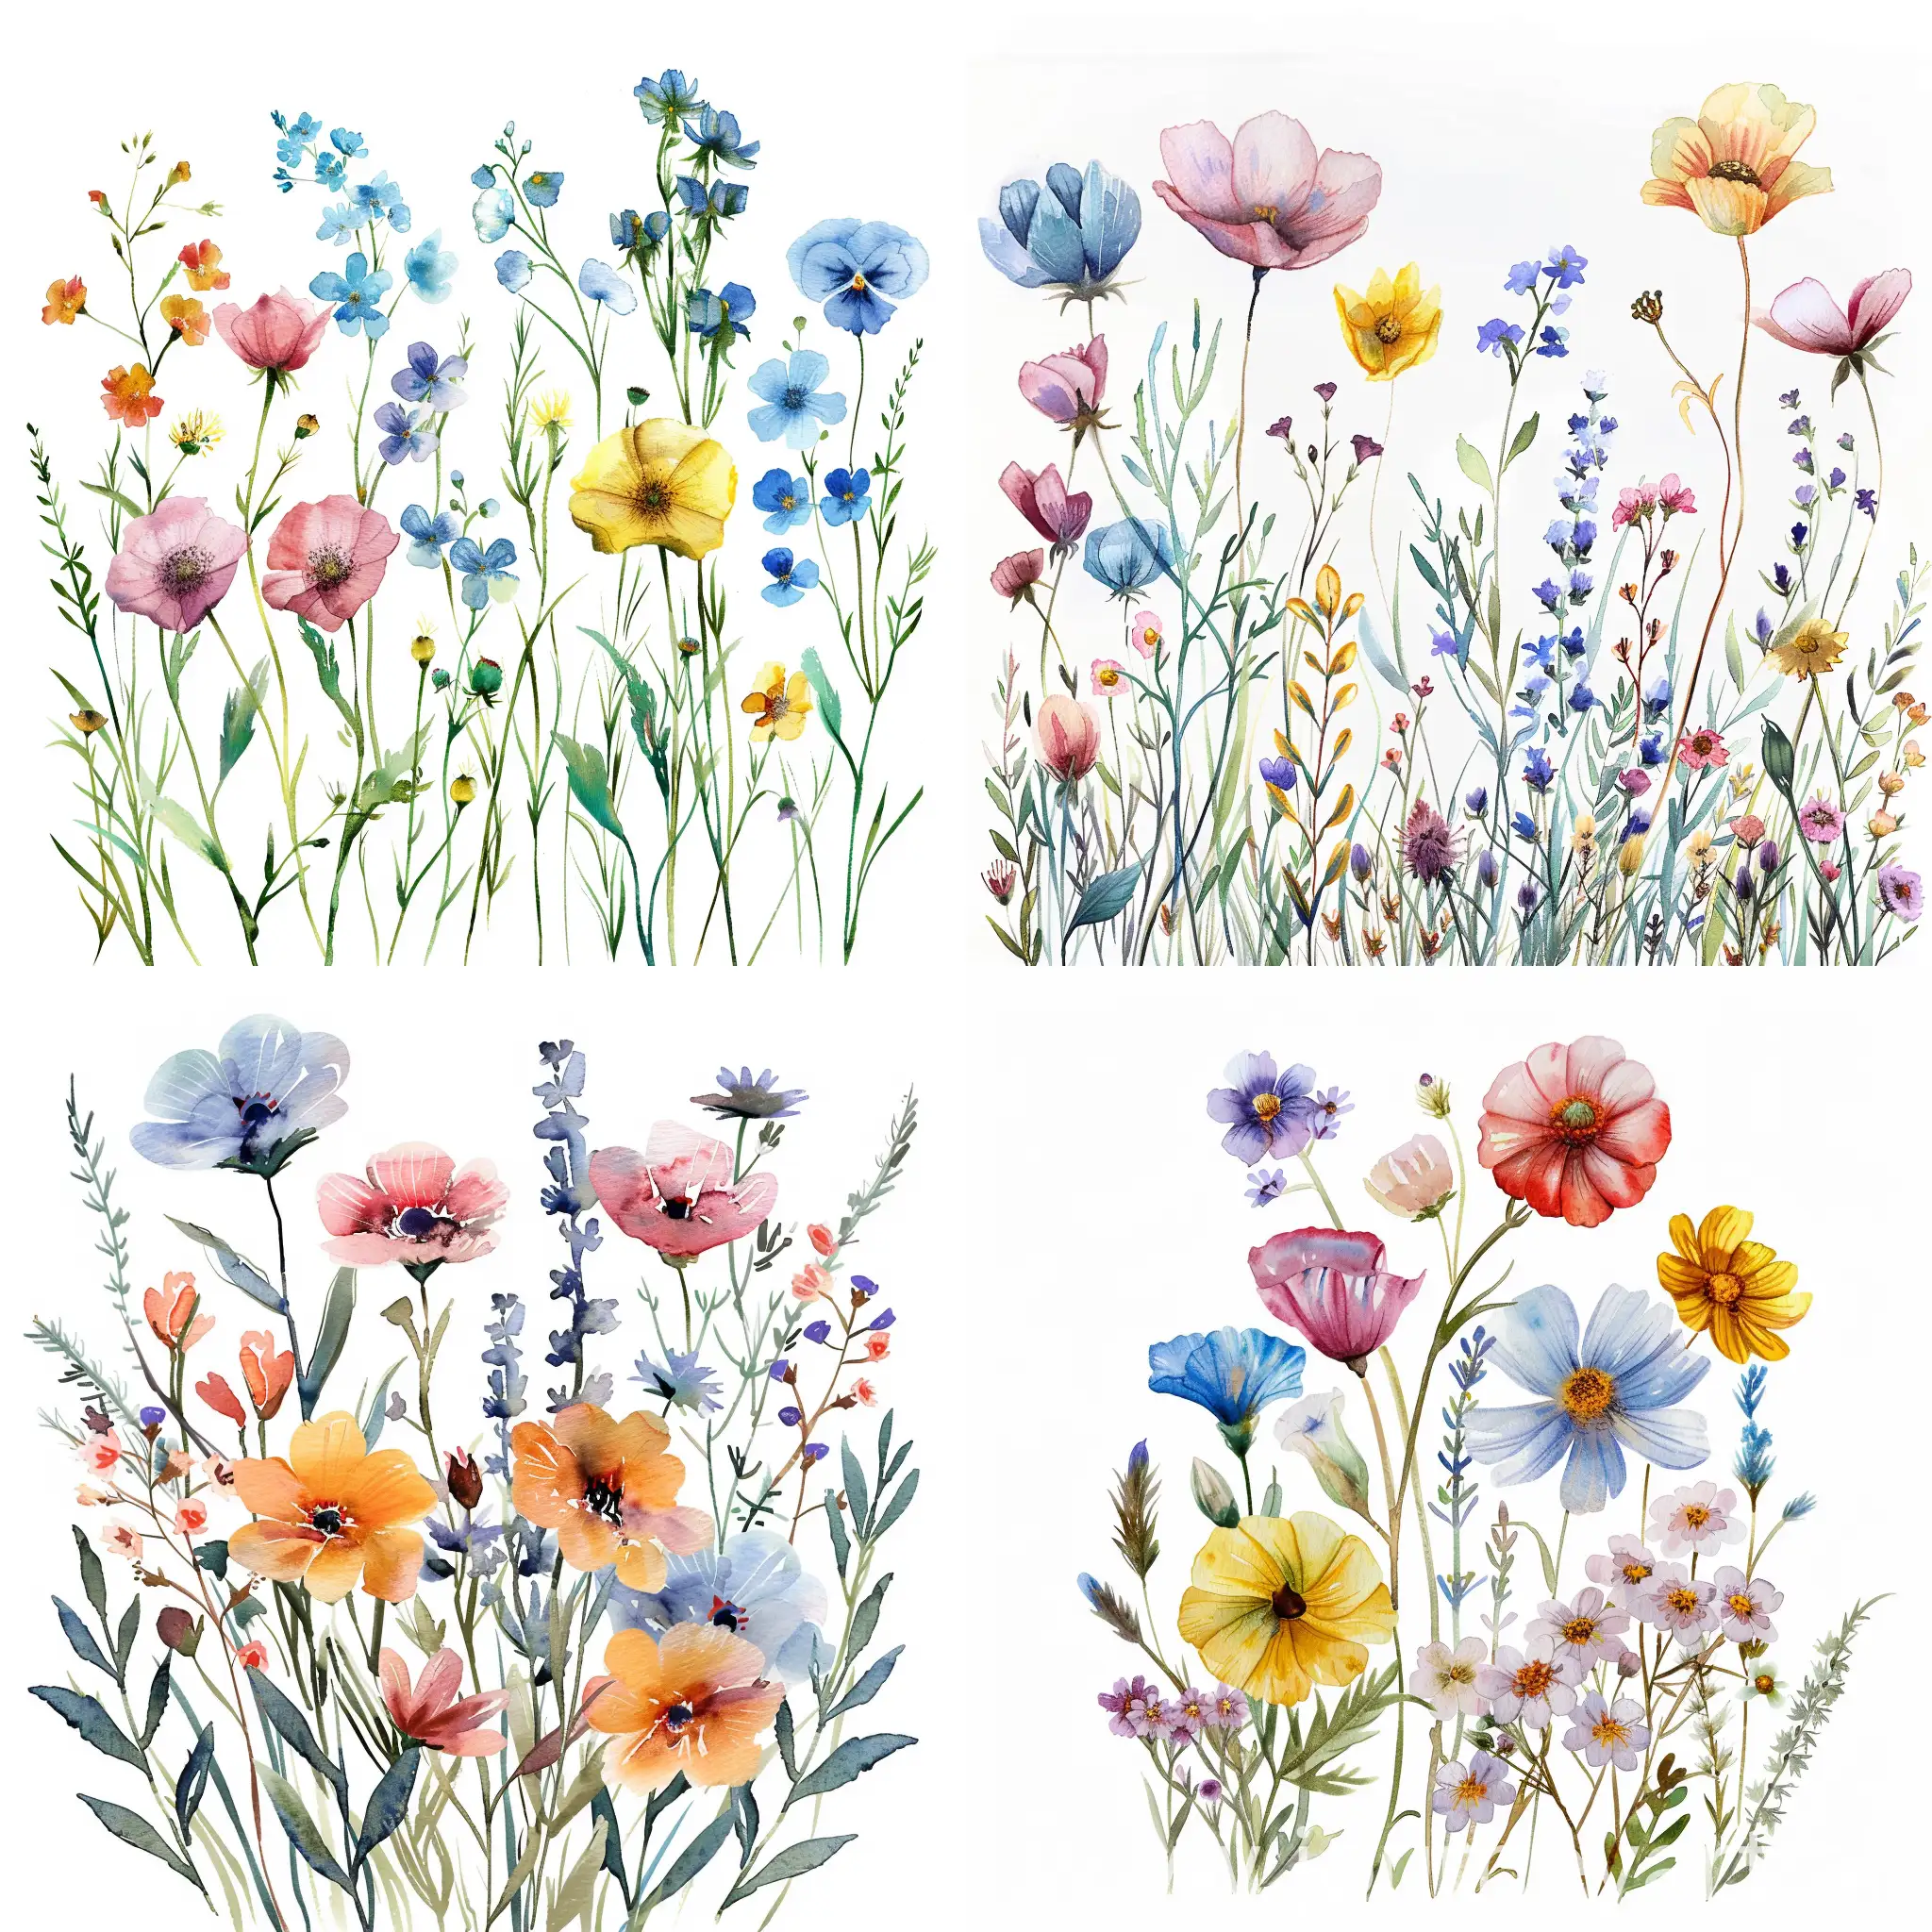 Soft-Handpainted-Watercolor-Wildflowers-on-White-Background